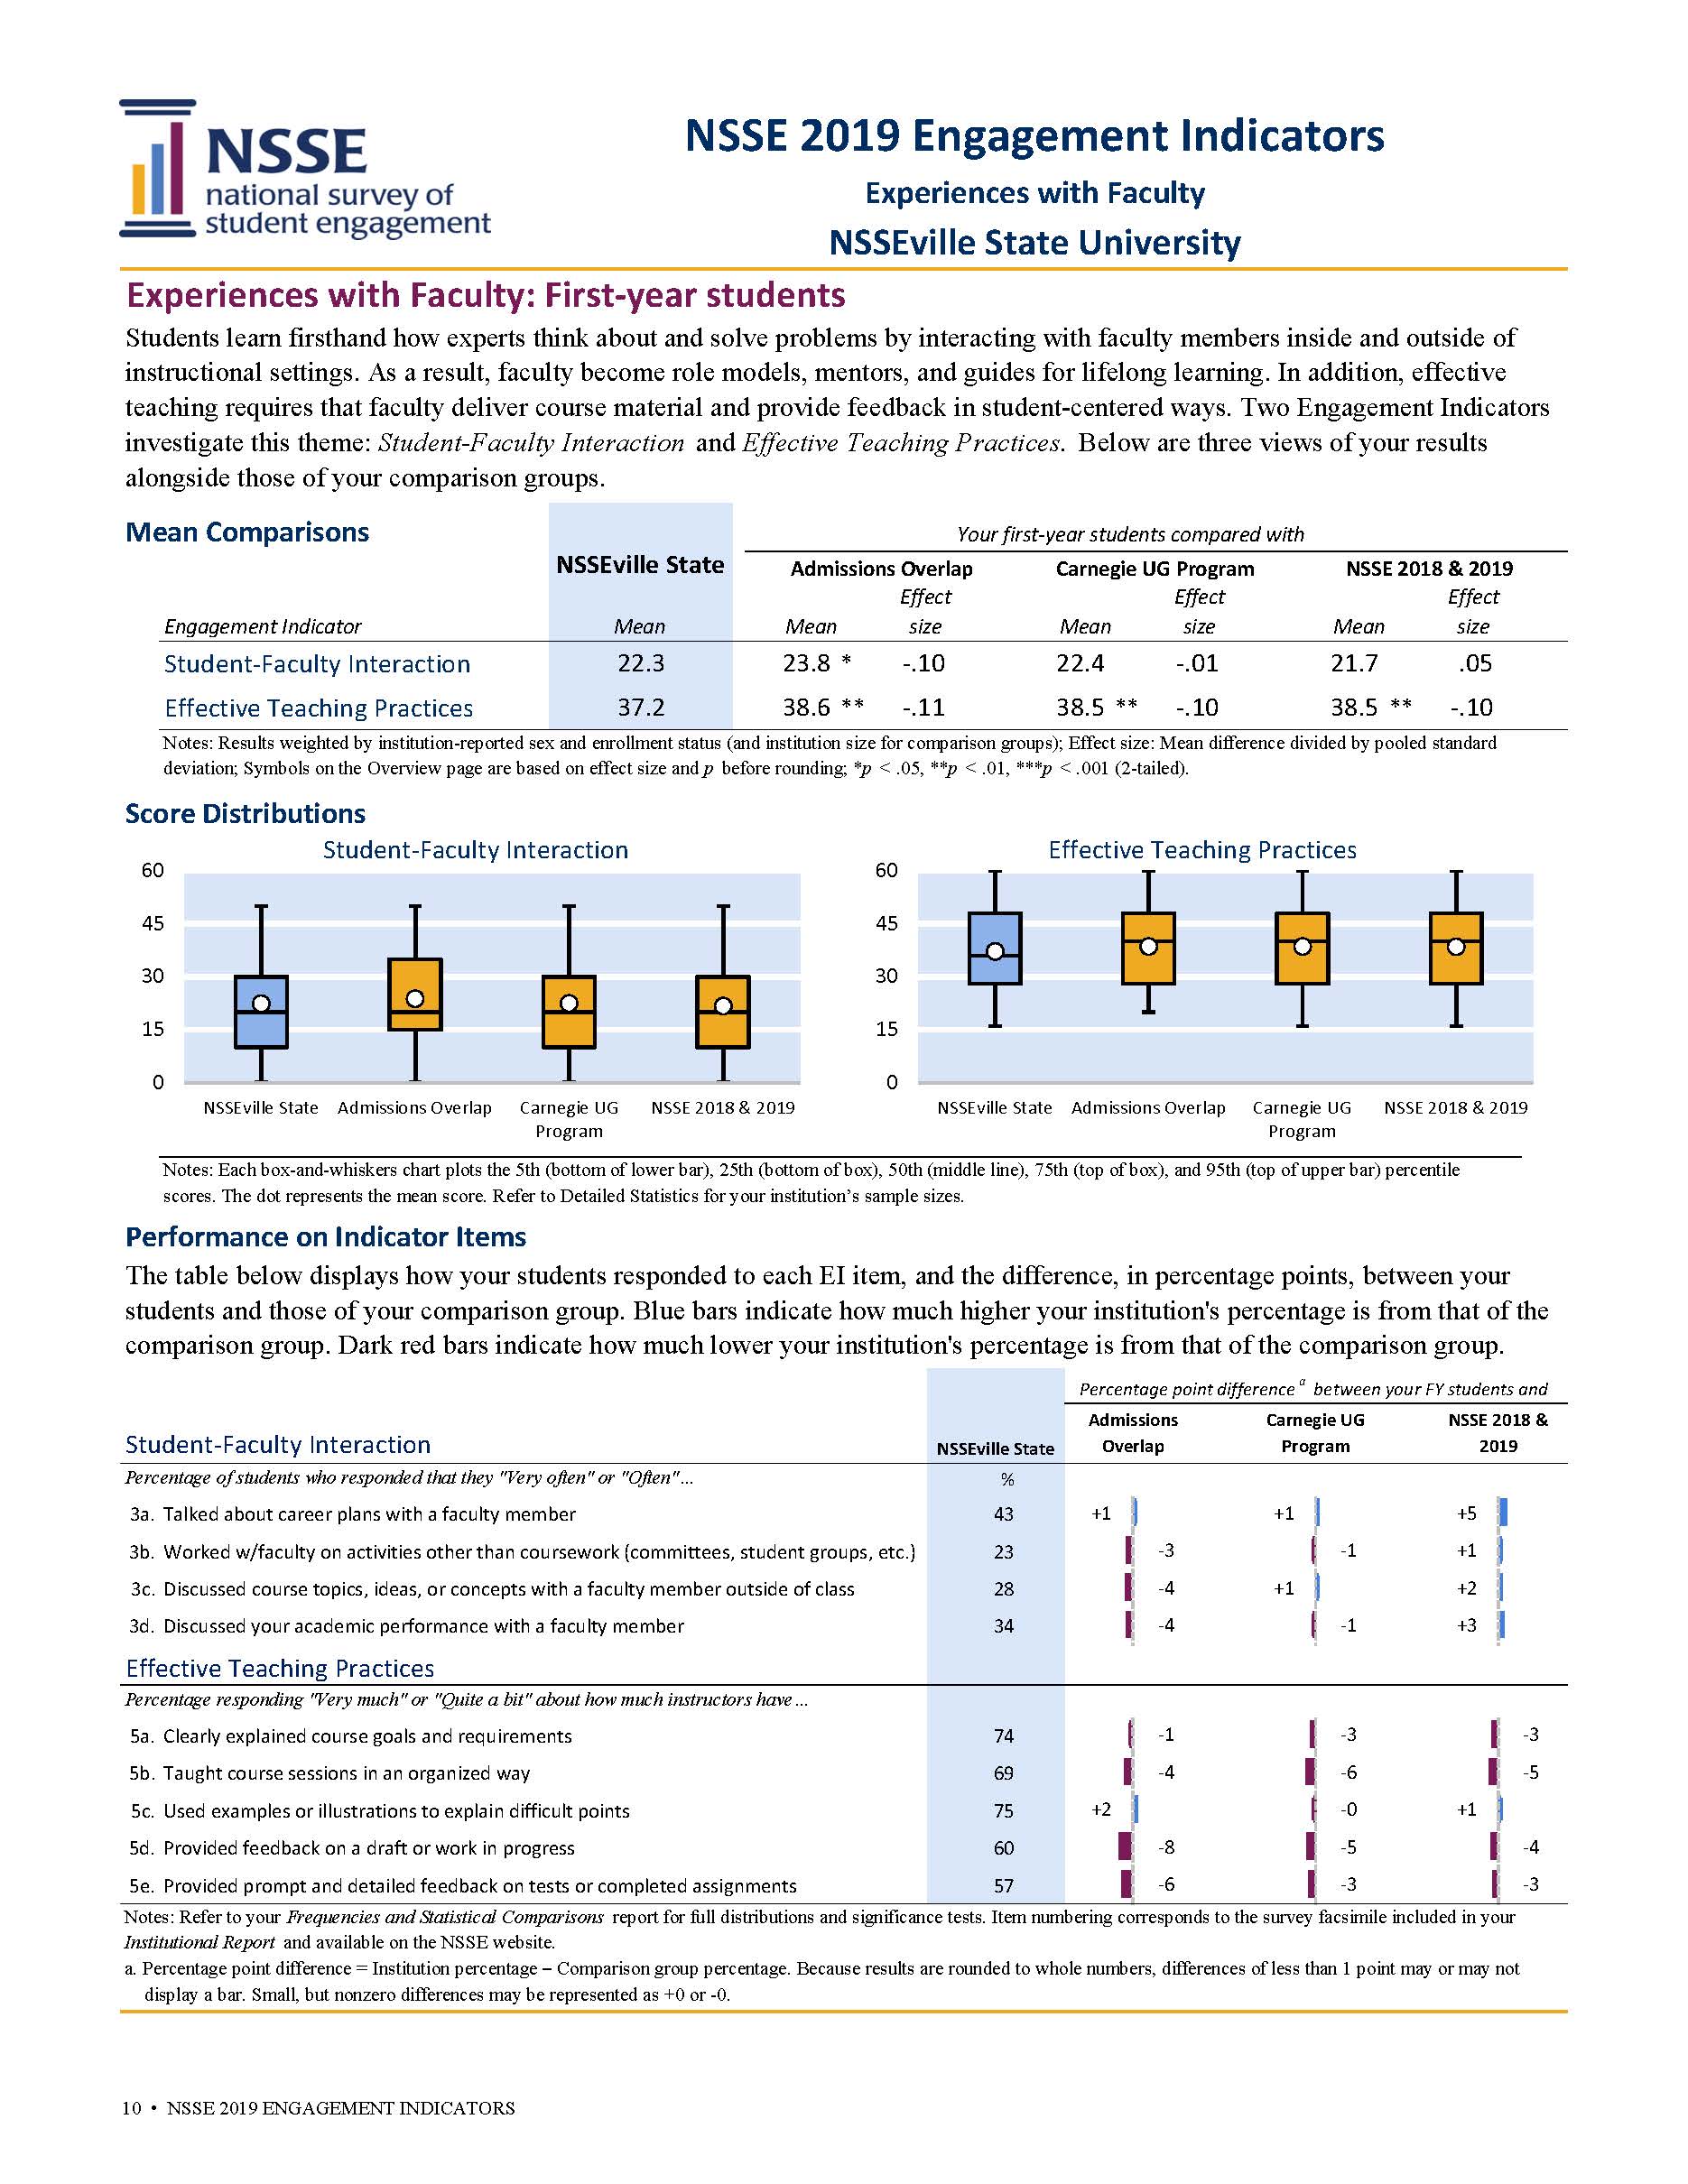 Sample Report: page 10 of NSSE Engagement Indicators